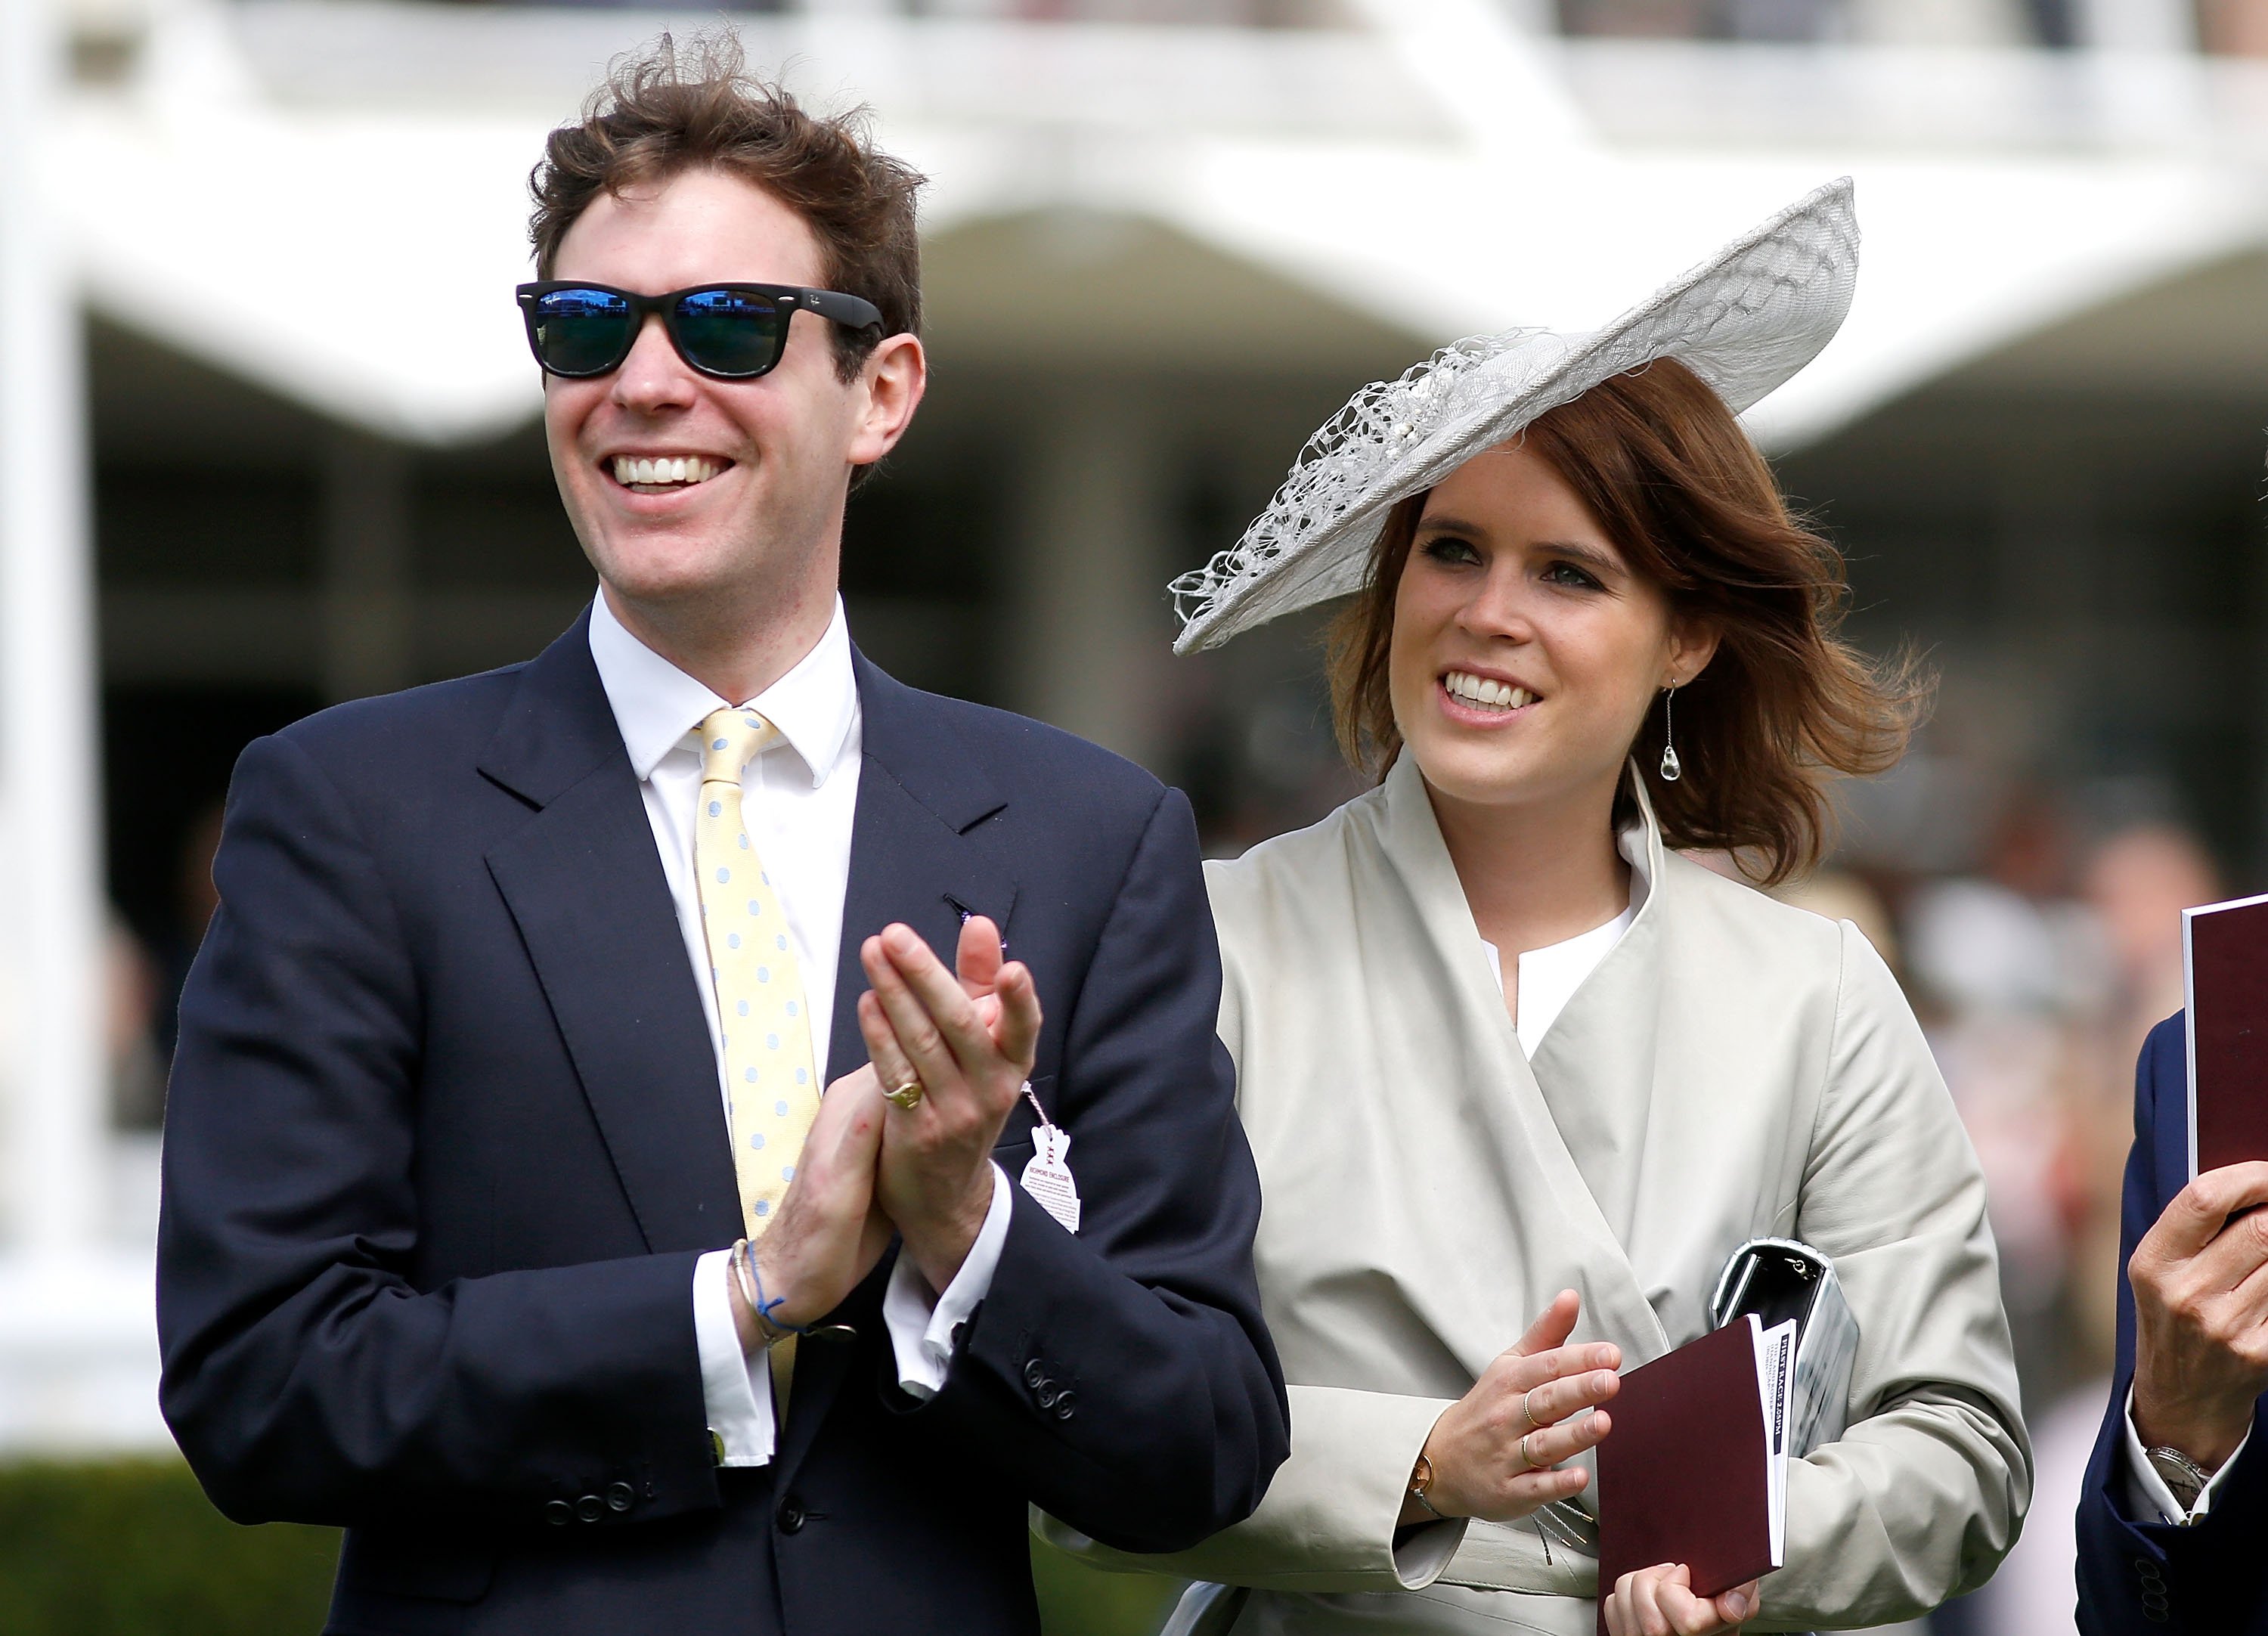 Princess Eugenie pictured attending at the Qatar Goodwood Festival at Goodwood Racecourse in England 2015. | Photo: Getty Images